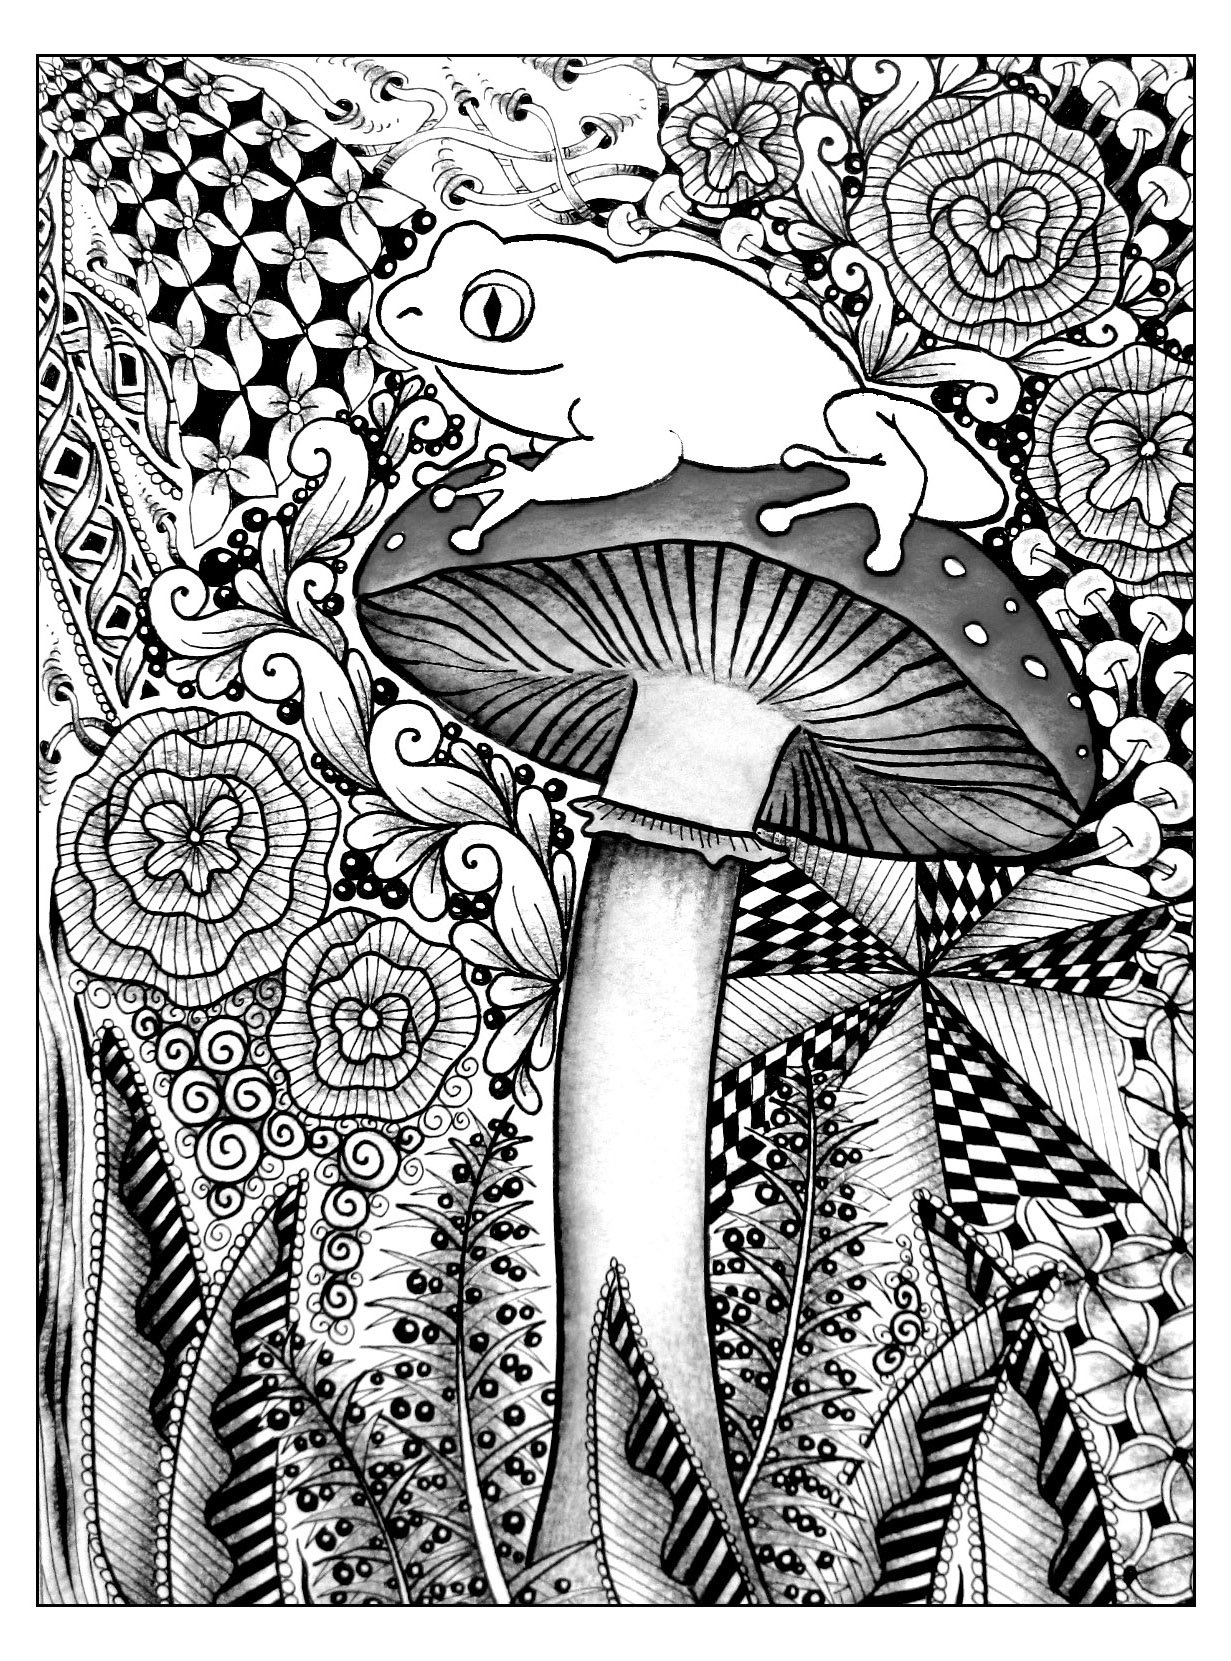 Mushroom - Coloring Pages for Adults